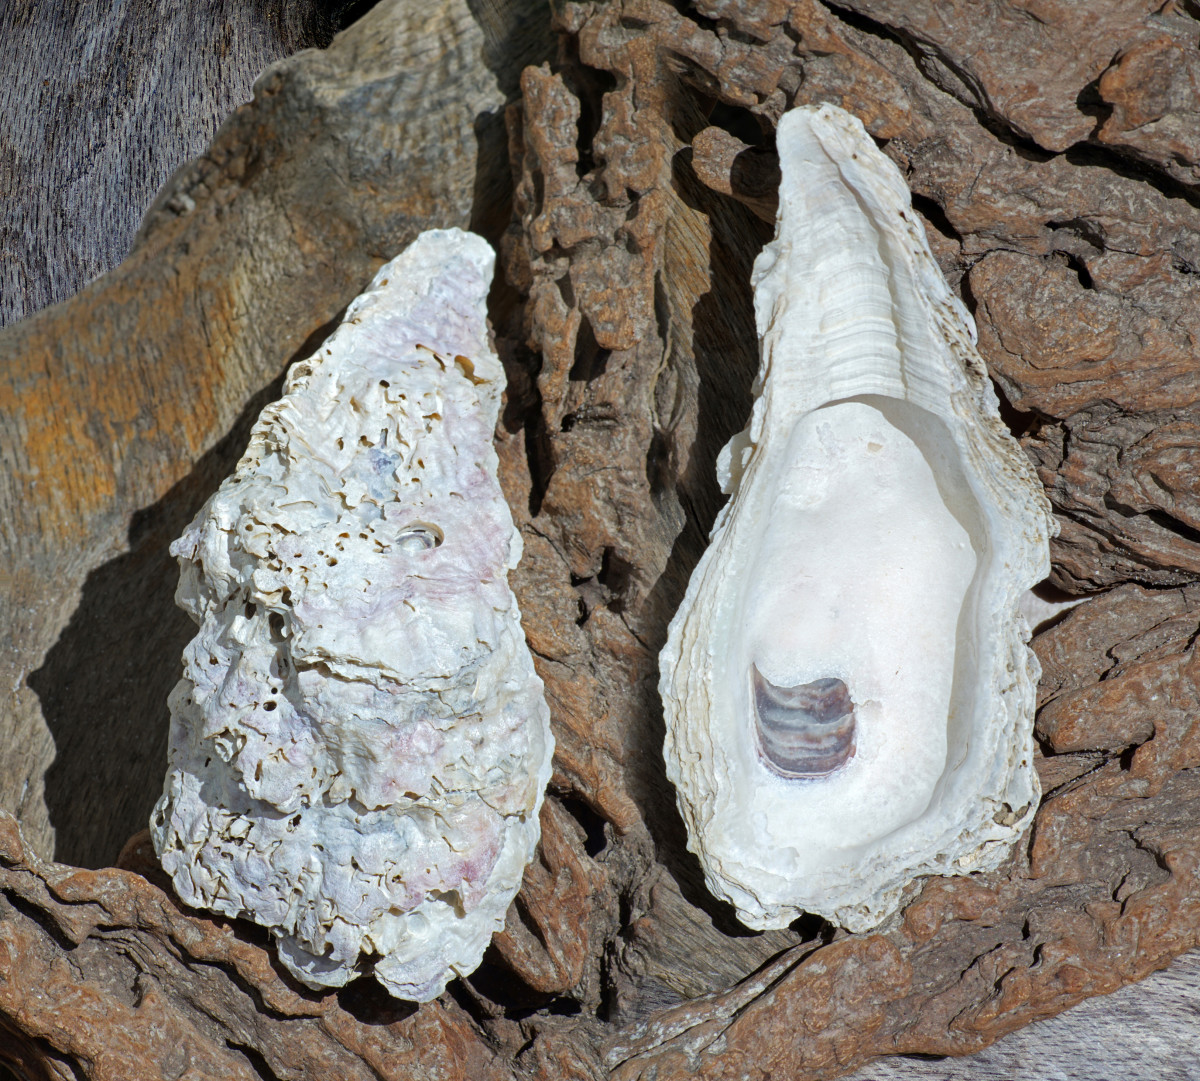 Eastern Oyster Seashells showing interior abductor muscle scar and rough exterior